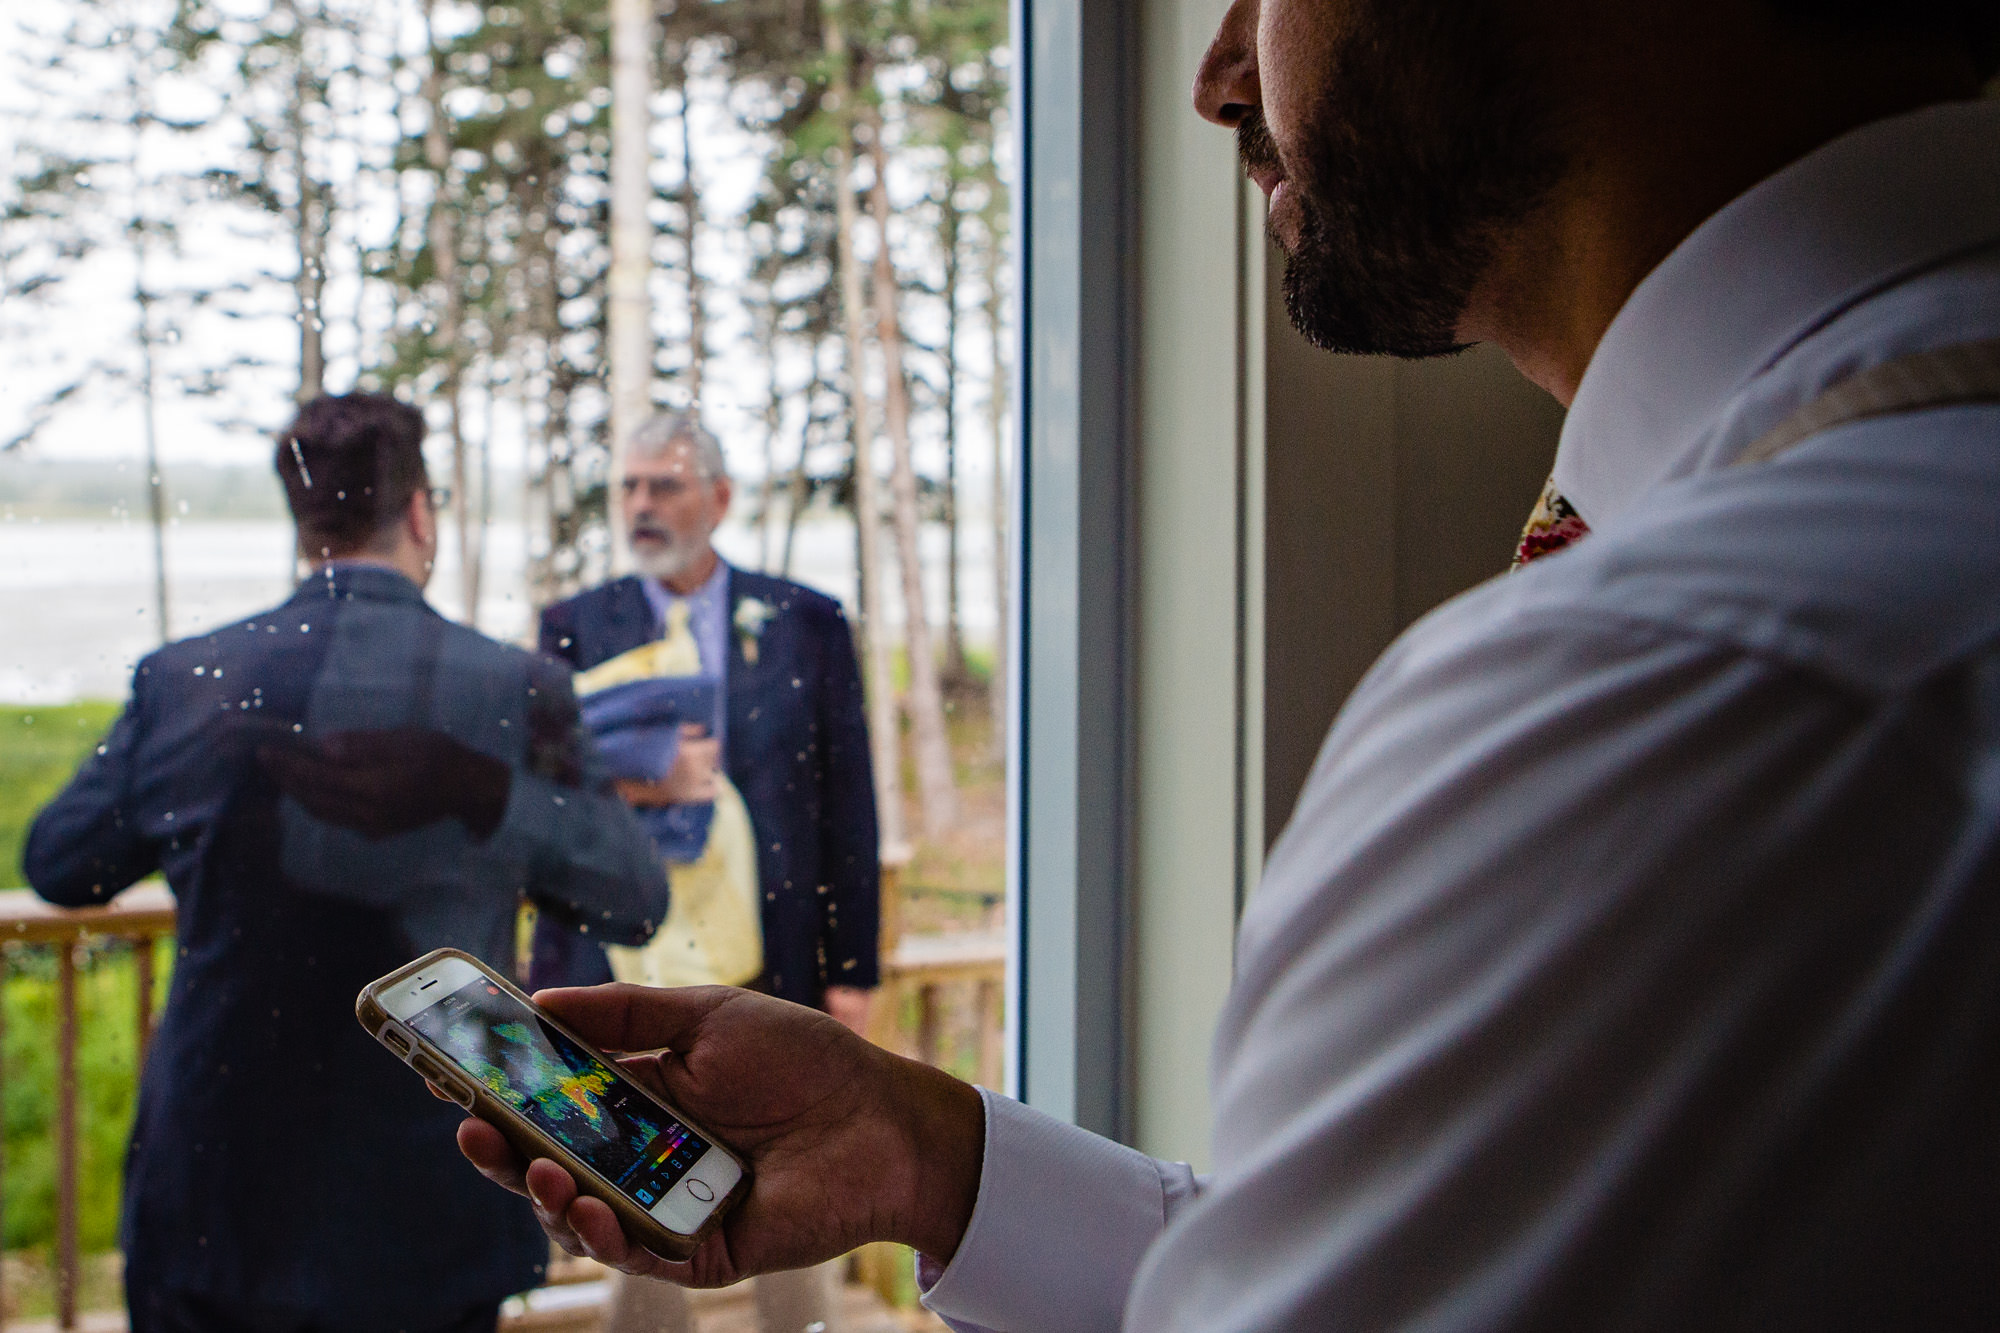 The groom checks the weather radar when it begins to hail at his Maine wedding